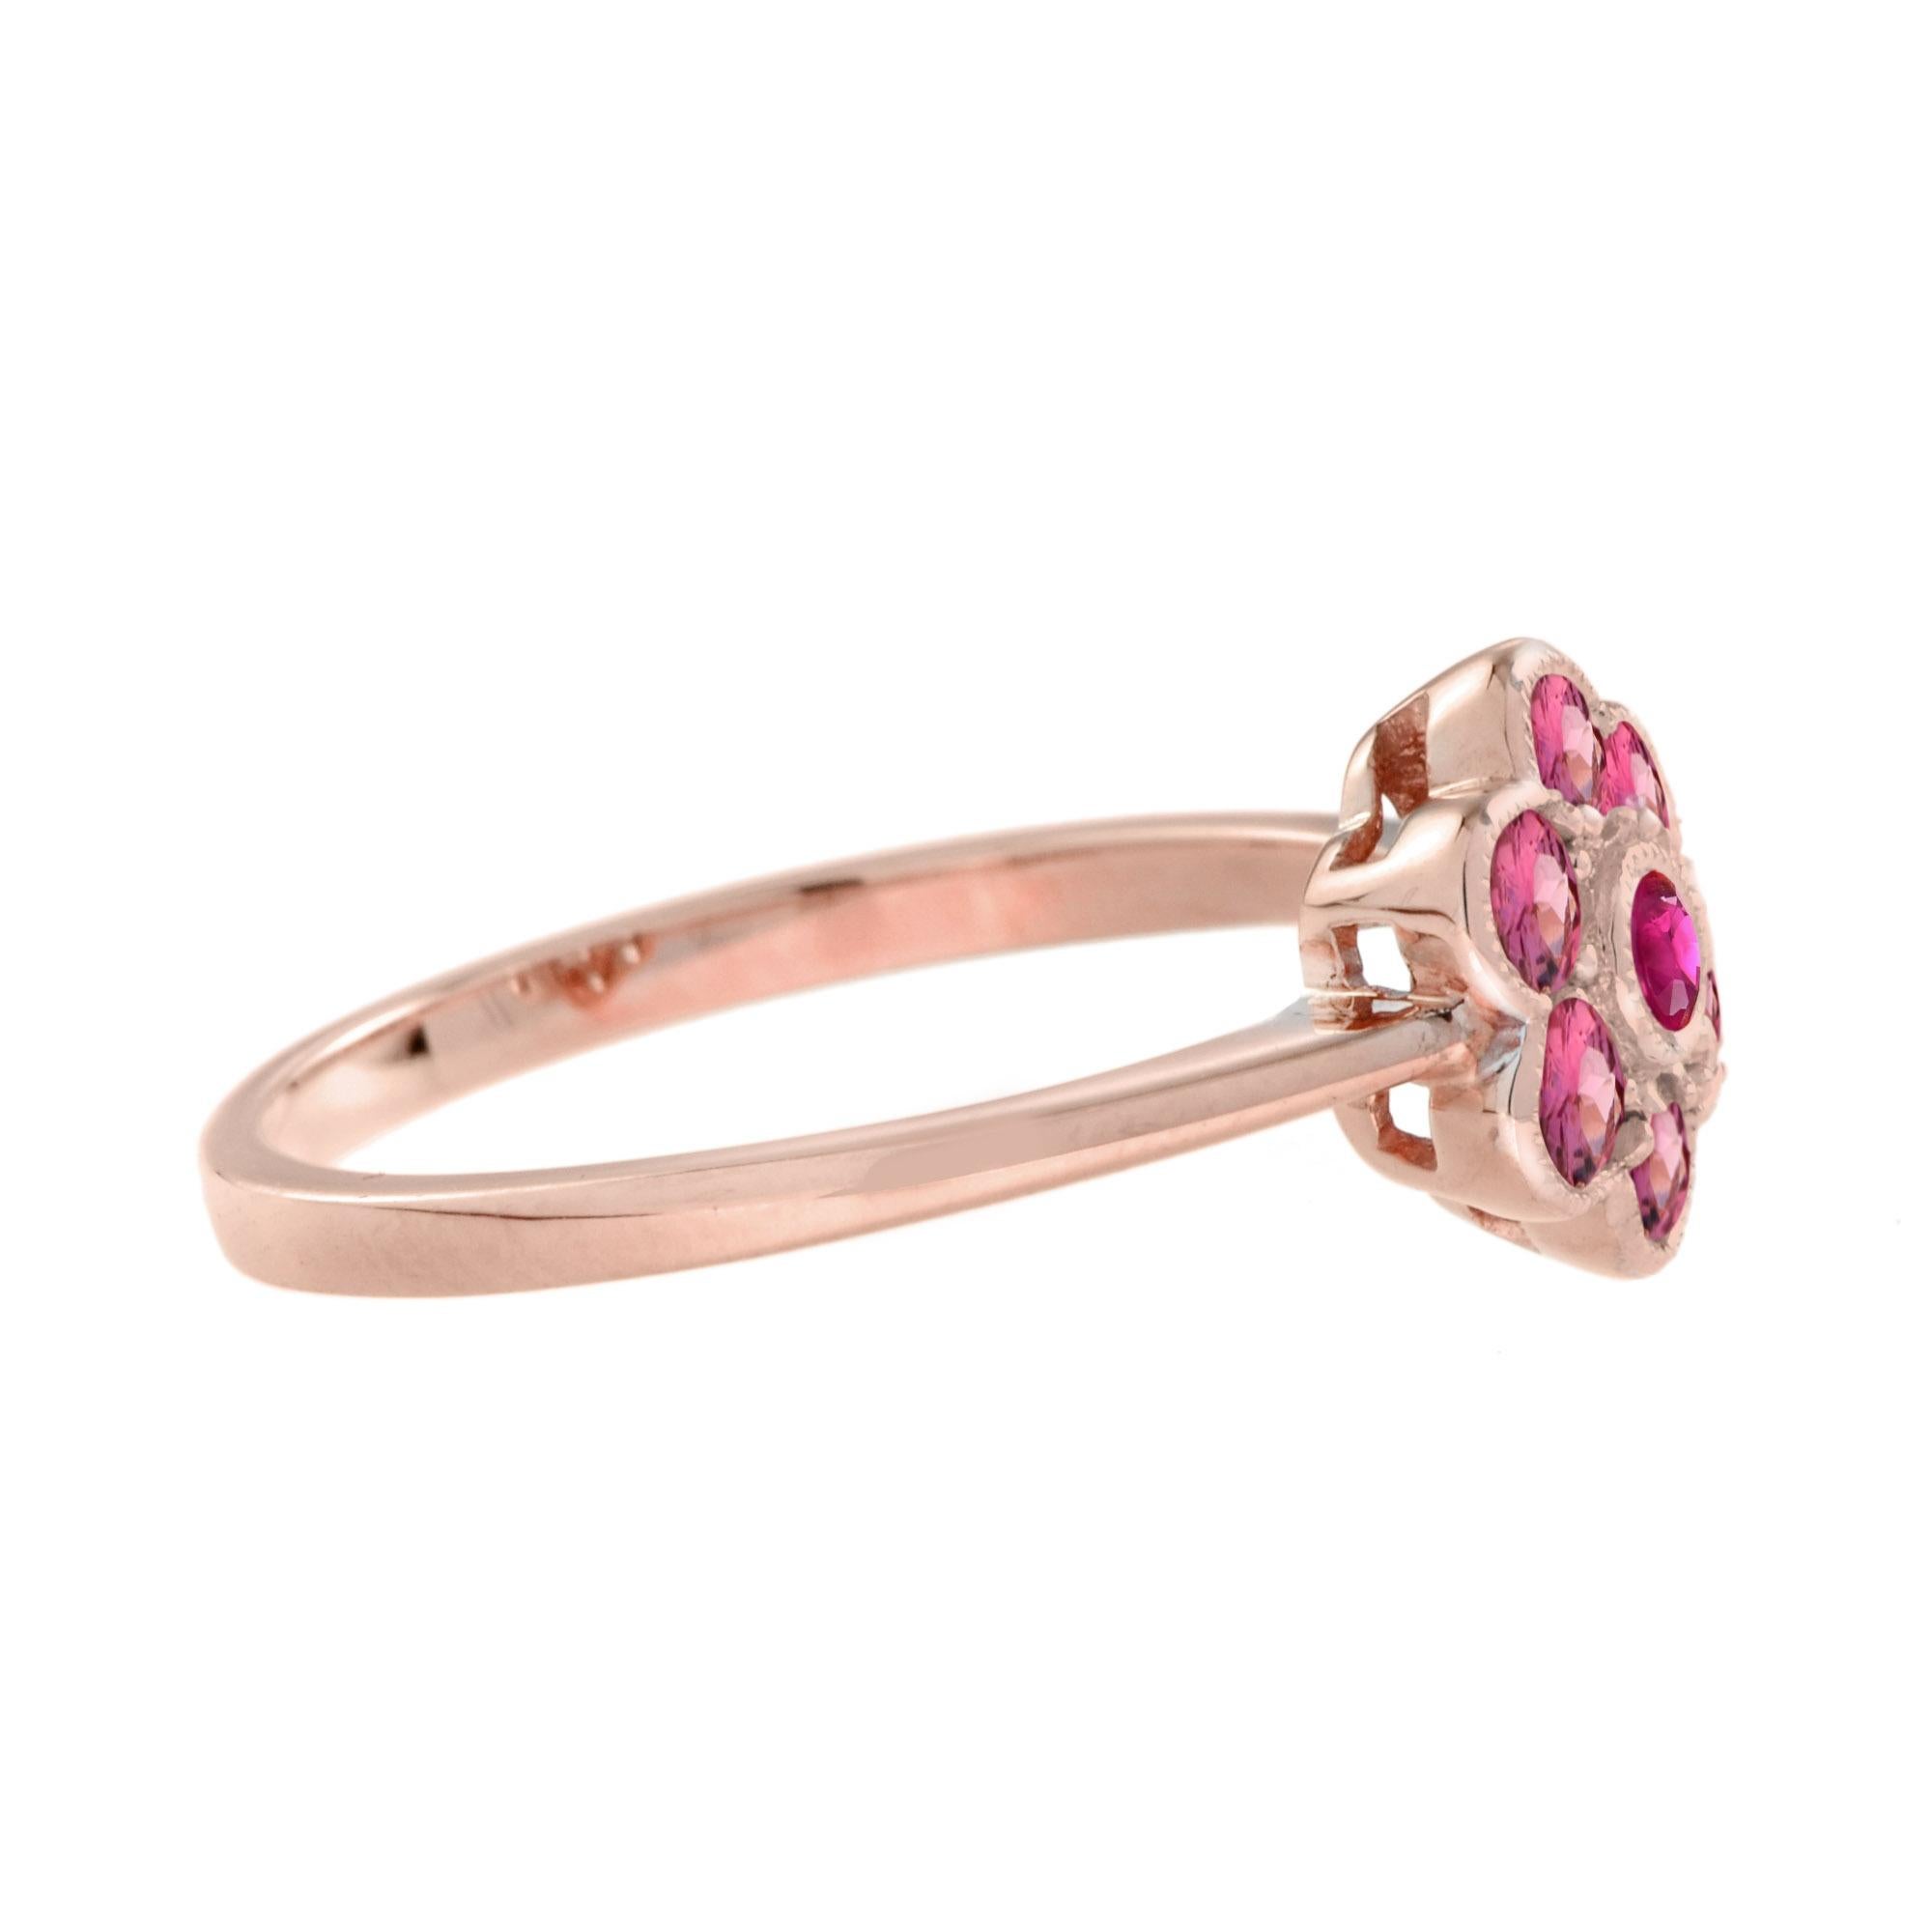 For Sale:  Ruby and Pink Tourmaline Floral Cluster Ring in 14K Rose Gold 5